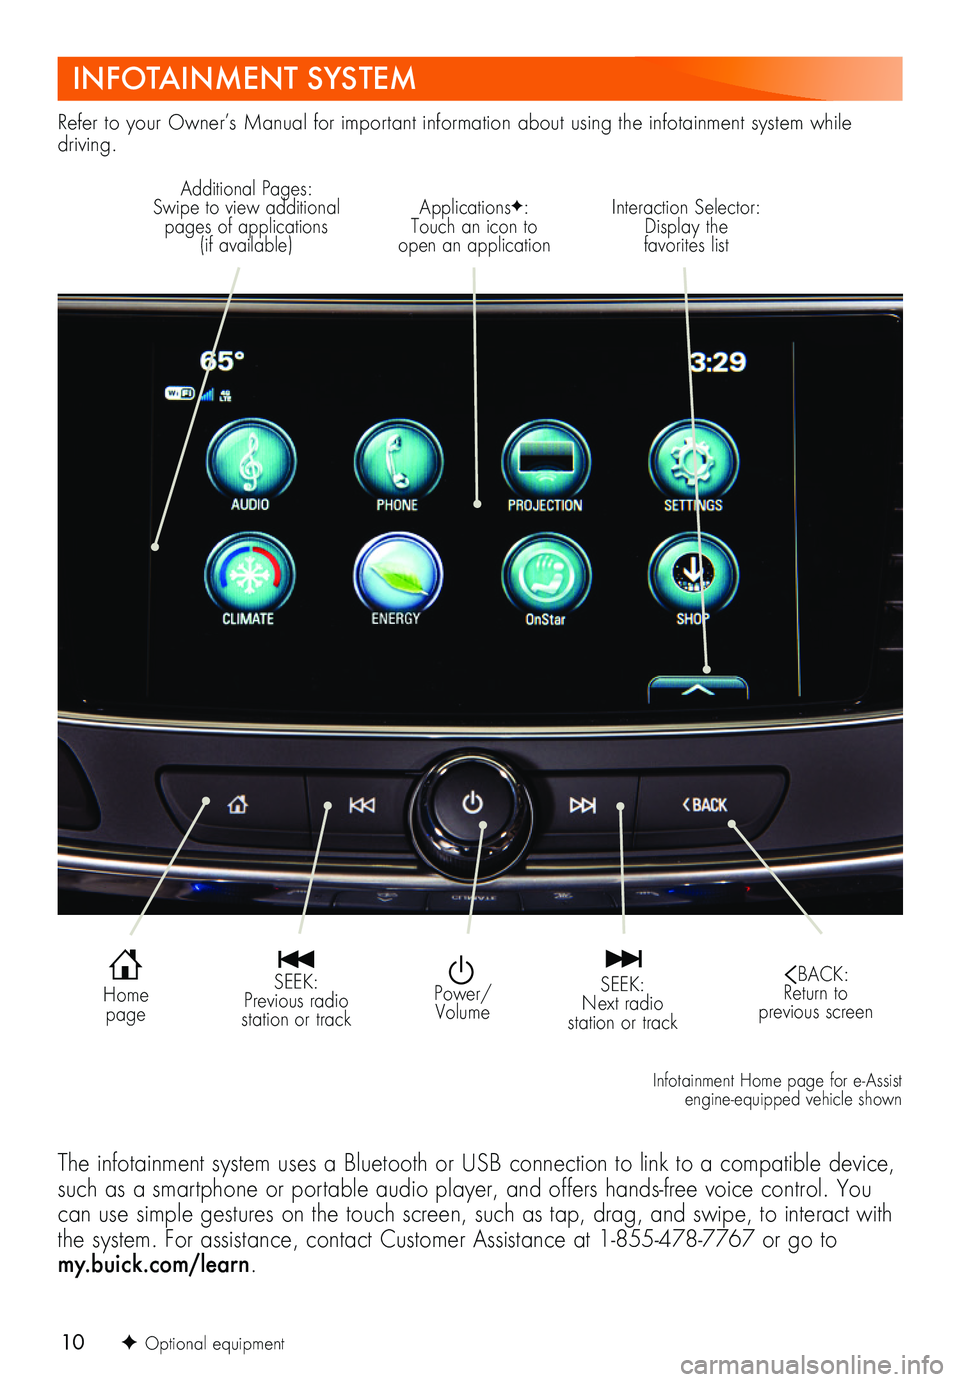 BUICK LACROSSE 2019  Get To Know Guide 10
INFOTAINMENT SYSTEM
Refer to your Owner’s Manual for important information about using the infotainment system while driving.
  Power/Volume
Interaction Selector: Display the  favorites list
Addi